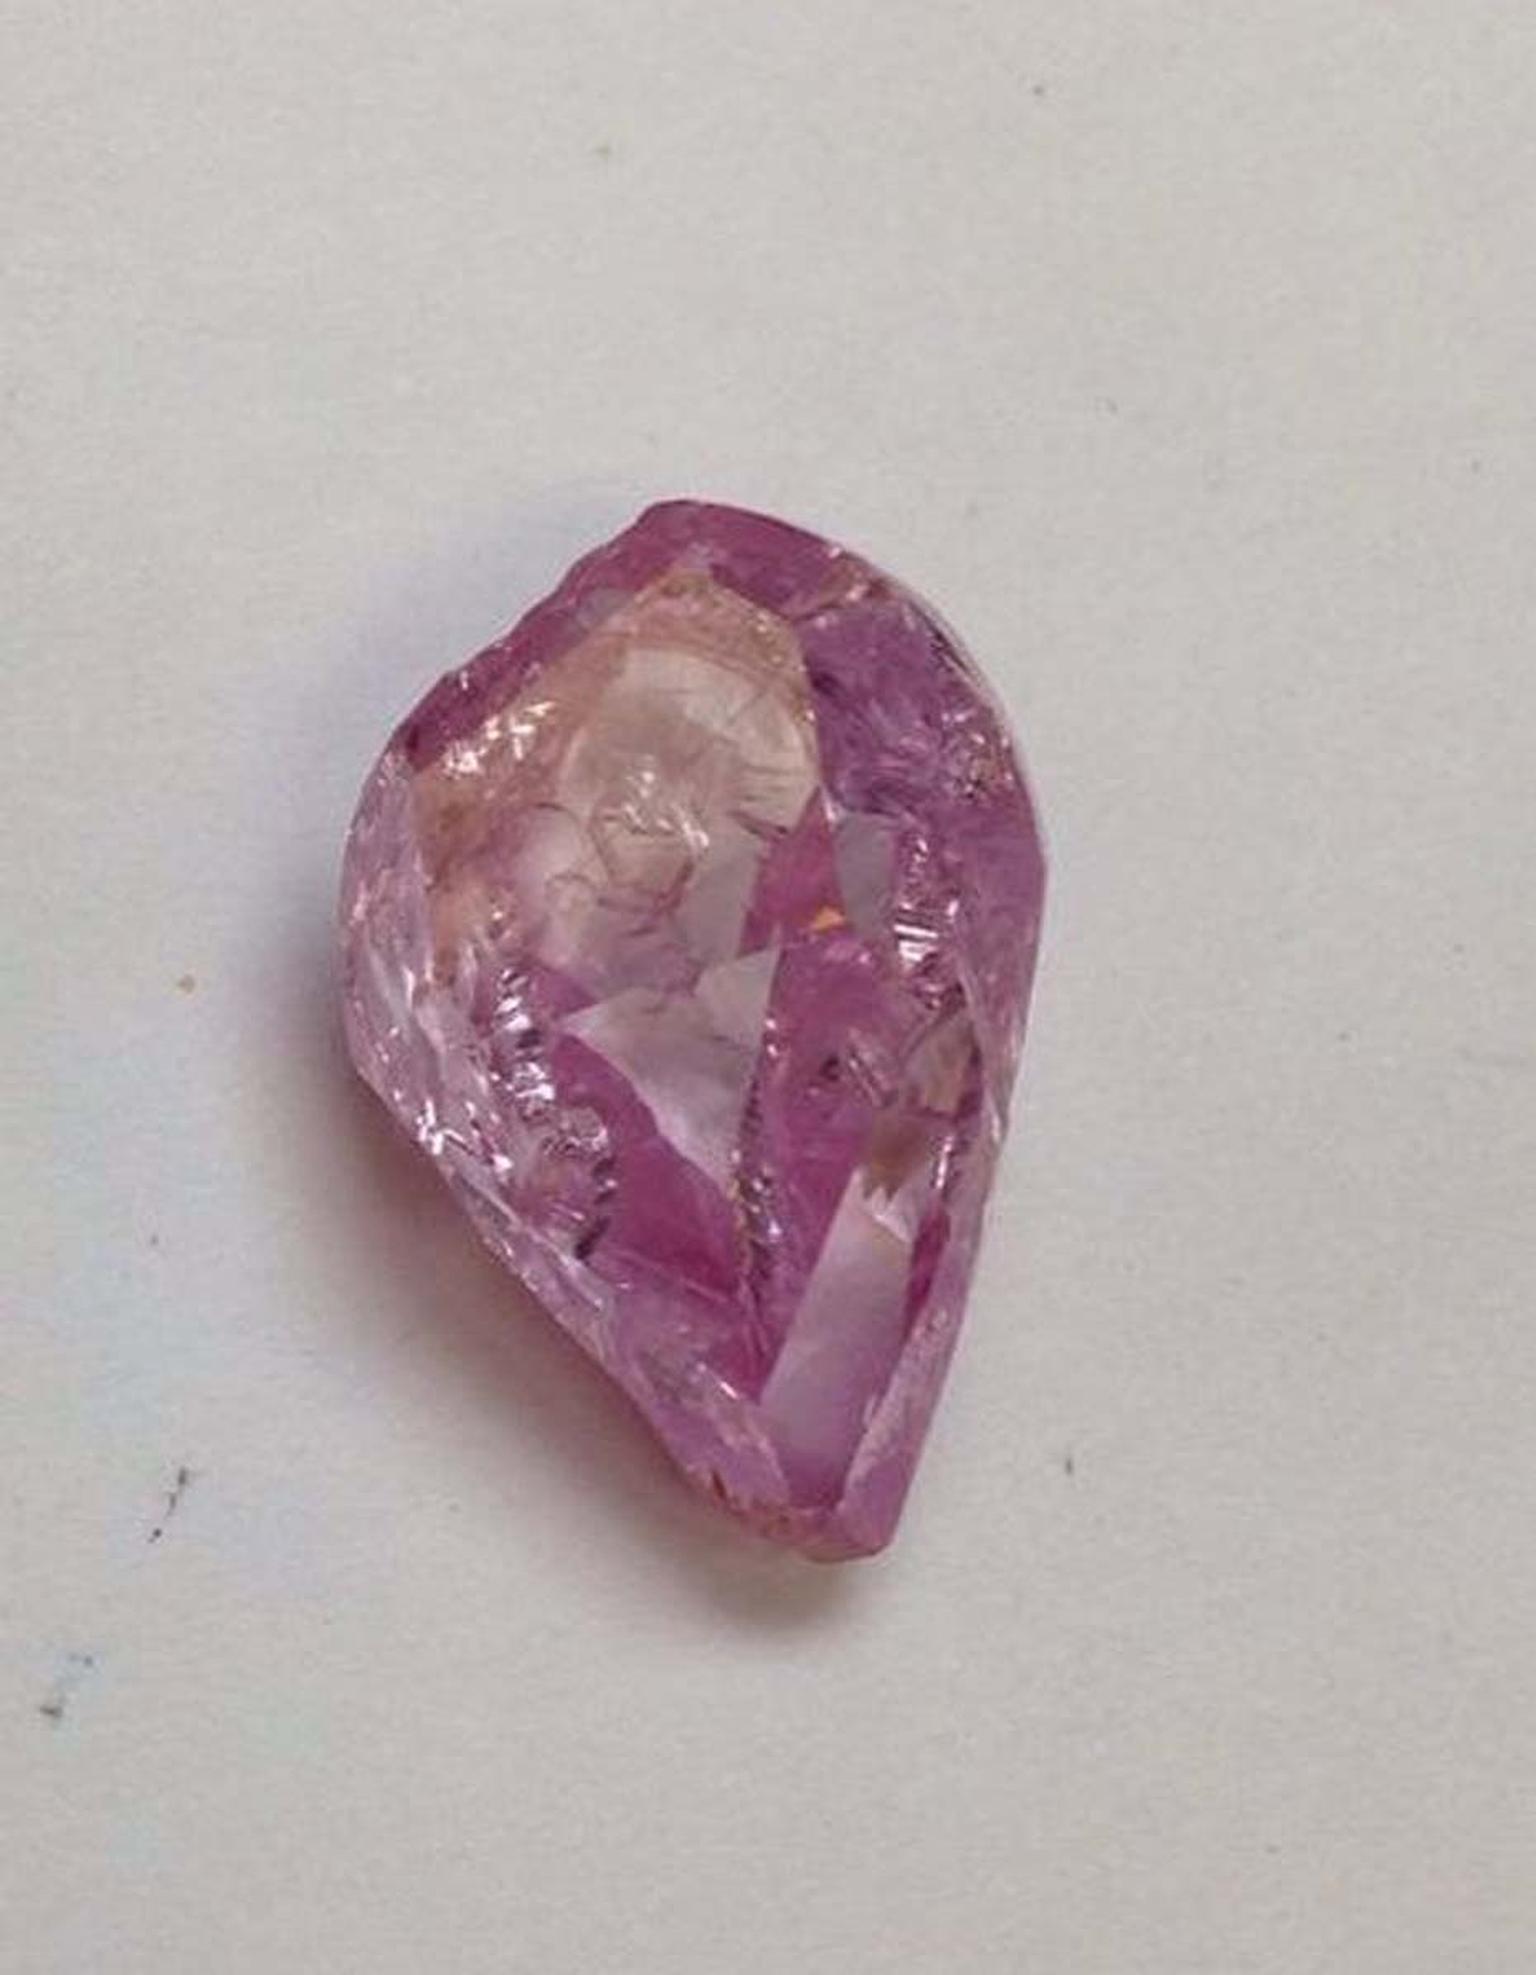 The Internally Flawless 8.41ct Fancy Vivid Purple-Pink Diamond, mined and cut by De Beers from a 19.54ct rough, could become one of the most valuable gems ever sold at auction when it goes under the hammer at Sotheby's Hong Kong this autumn.